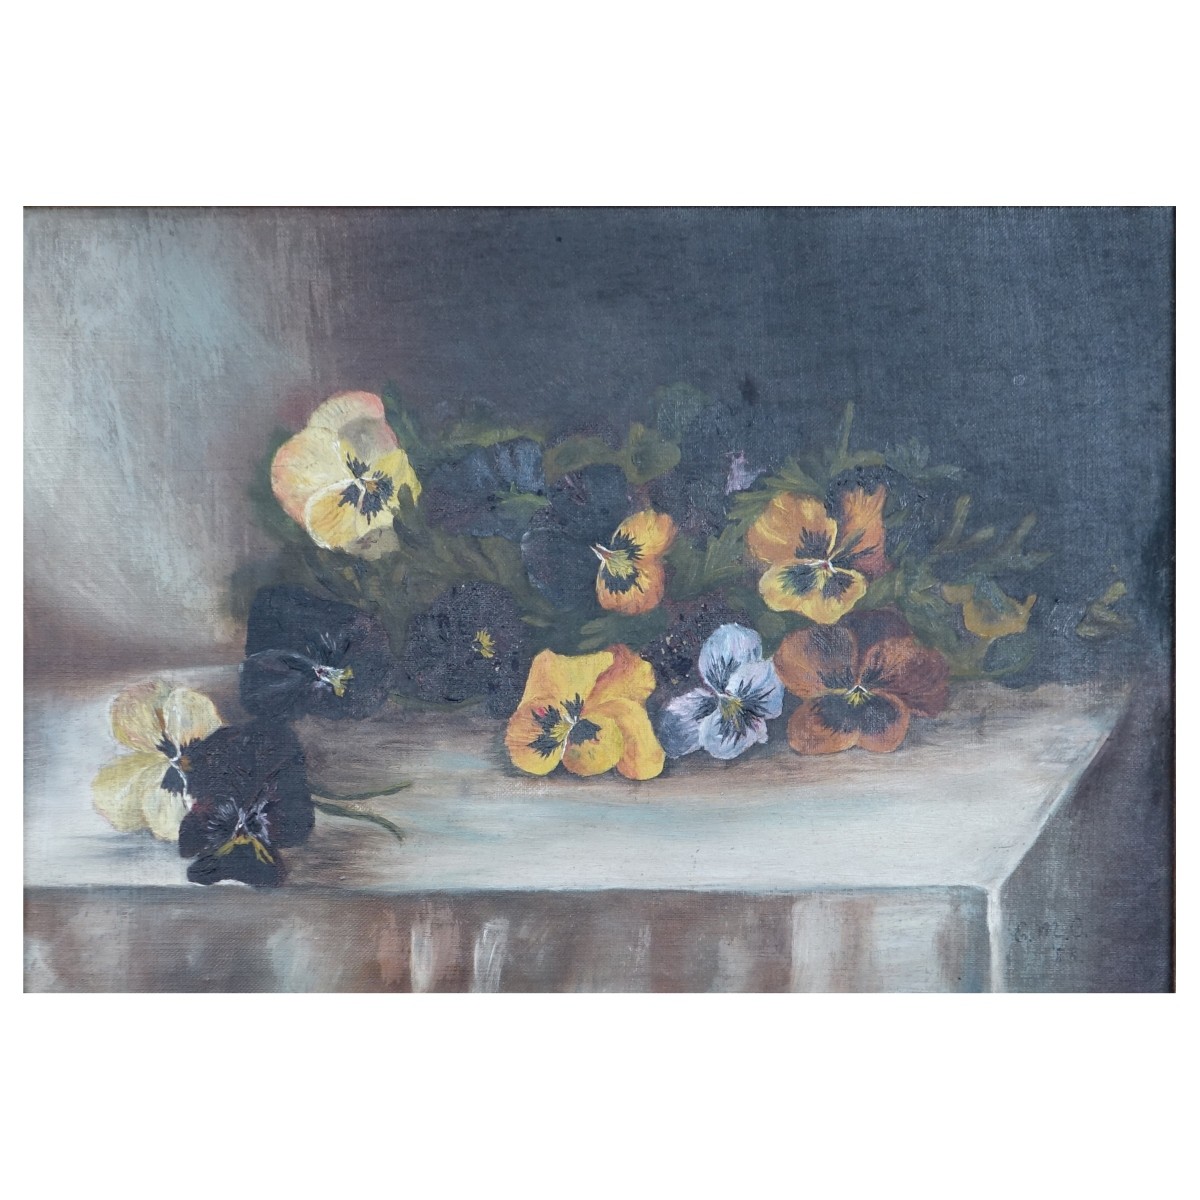 O/C Still Life of Pansies signed E. M. C. "88